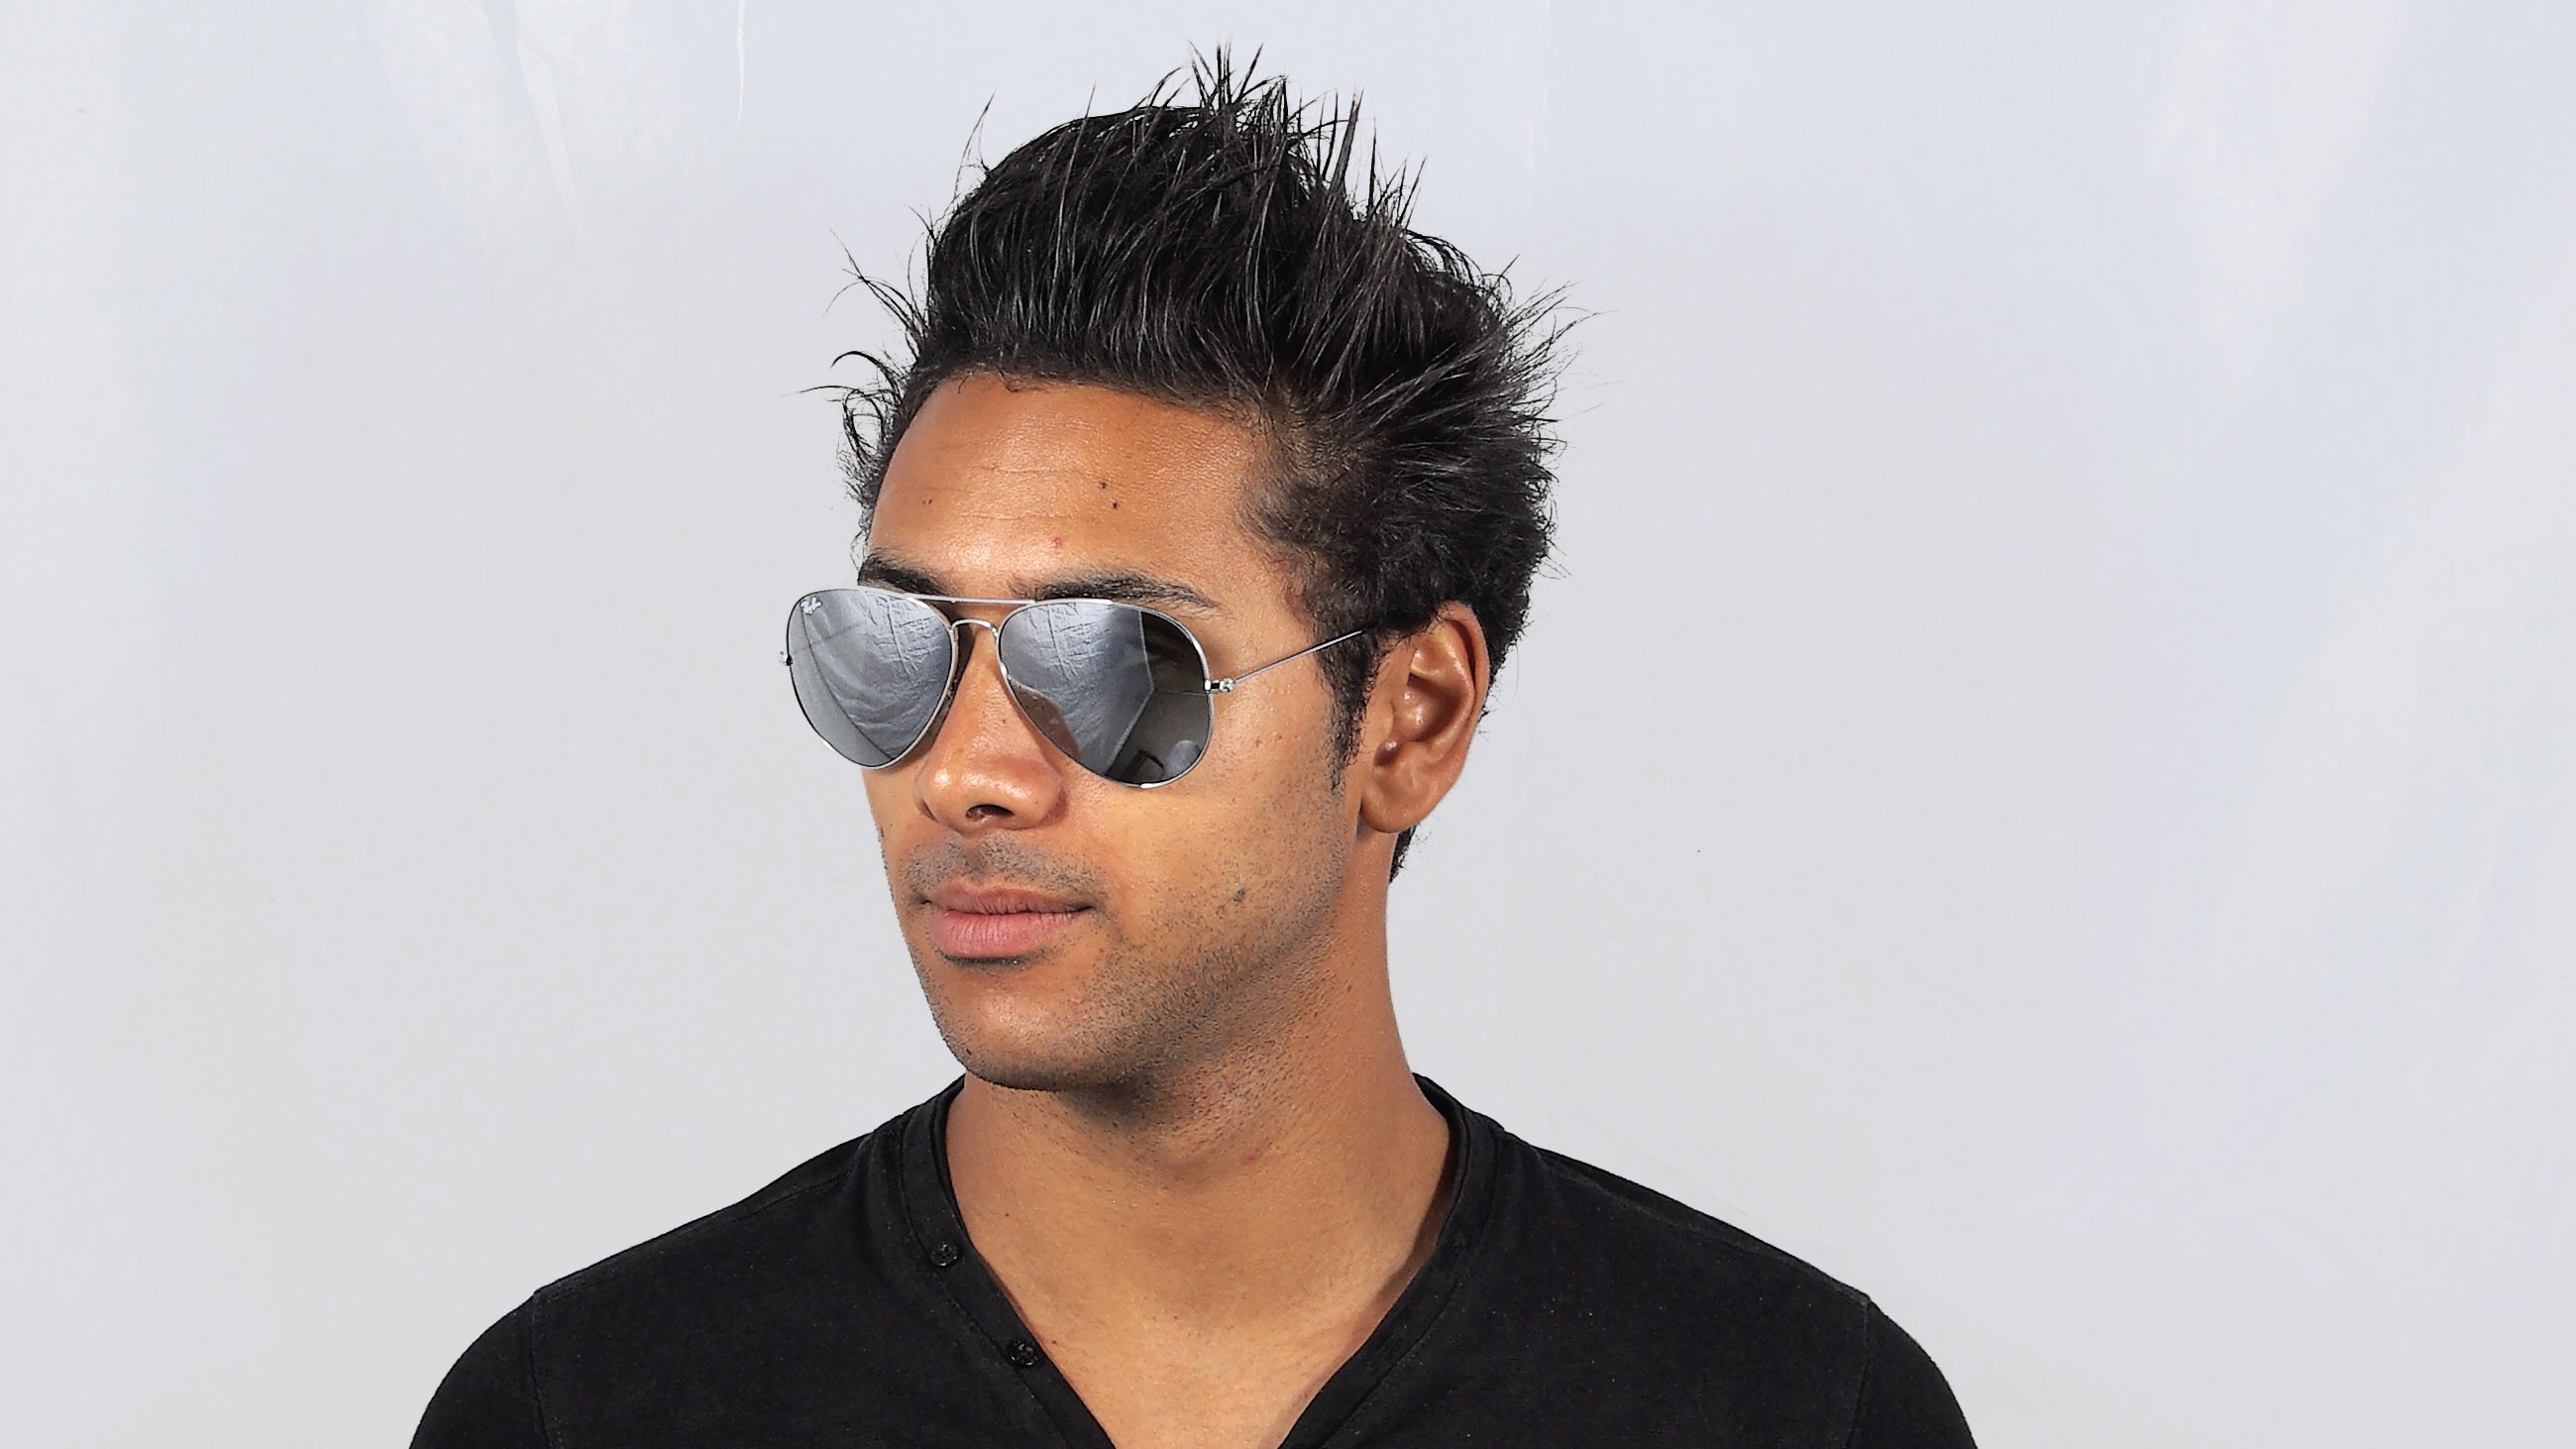 silver mirrored ray bans